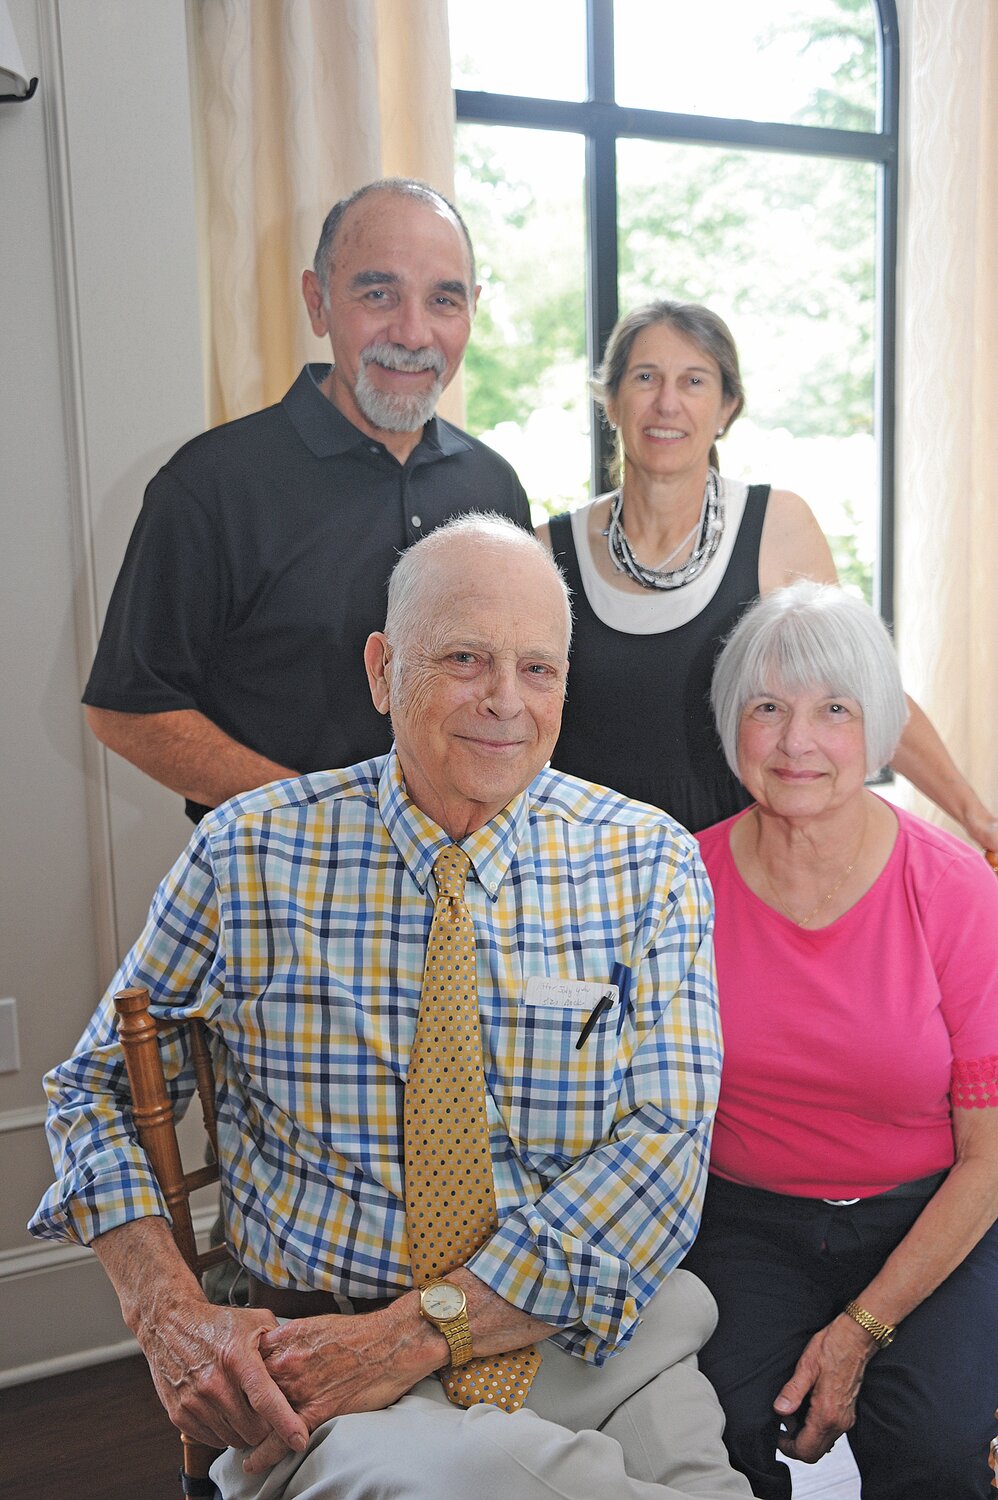 Carl and Diane Mill, standing, and Bill and Anne Bishop, sitting.